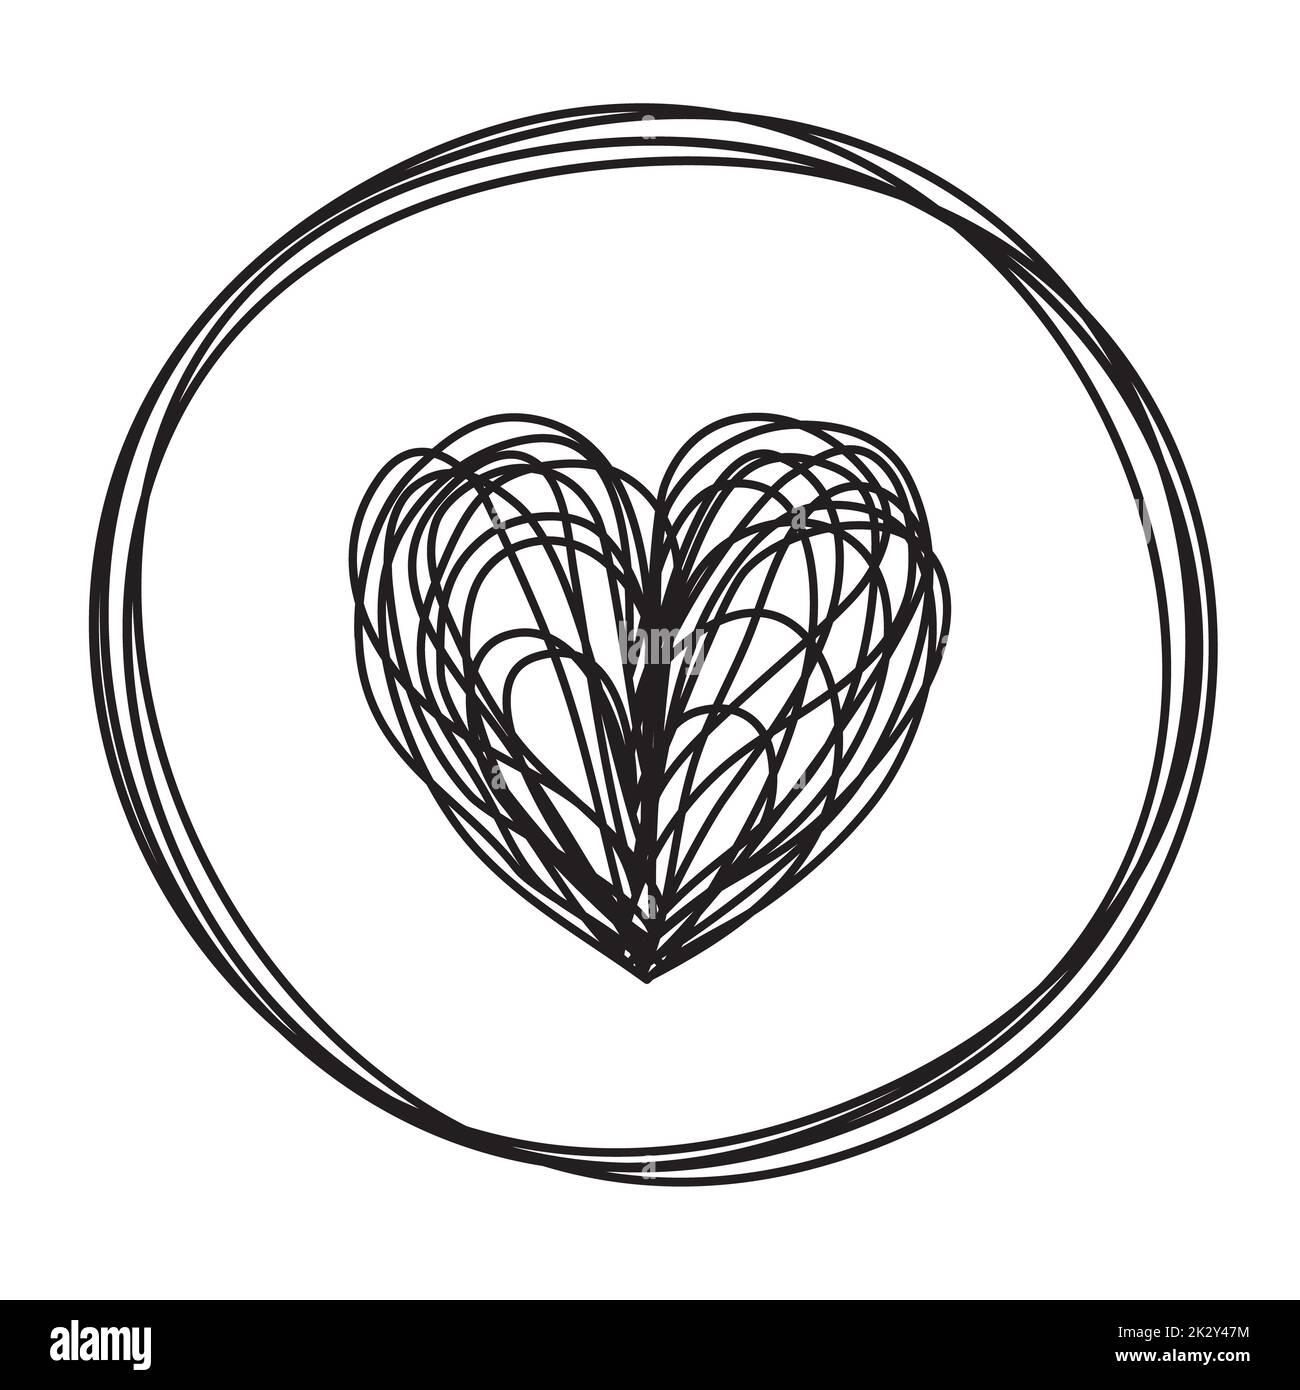 Heart in circle shaped tangled grungy scribble Stock Photo